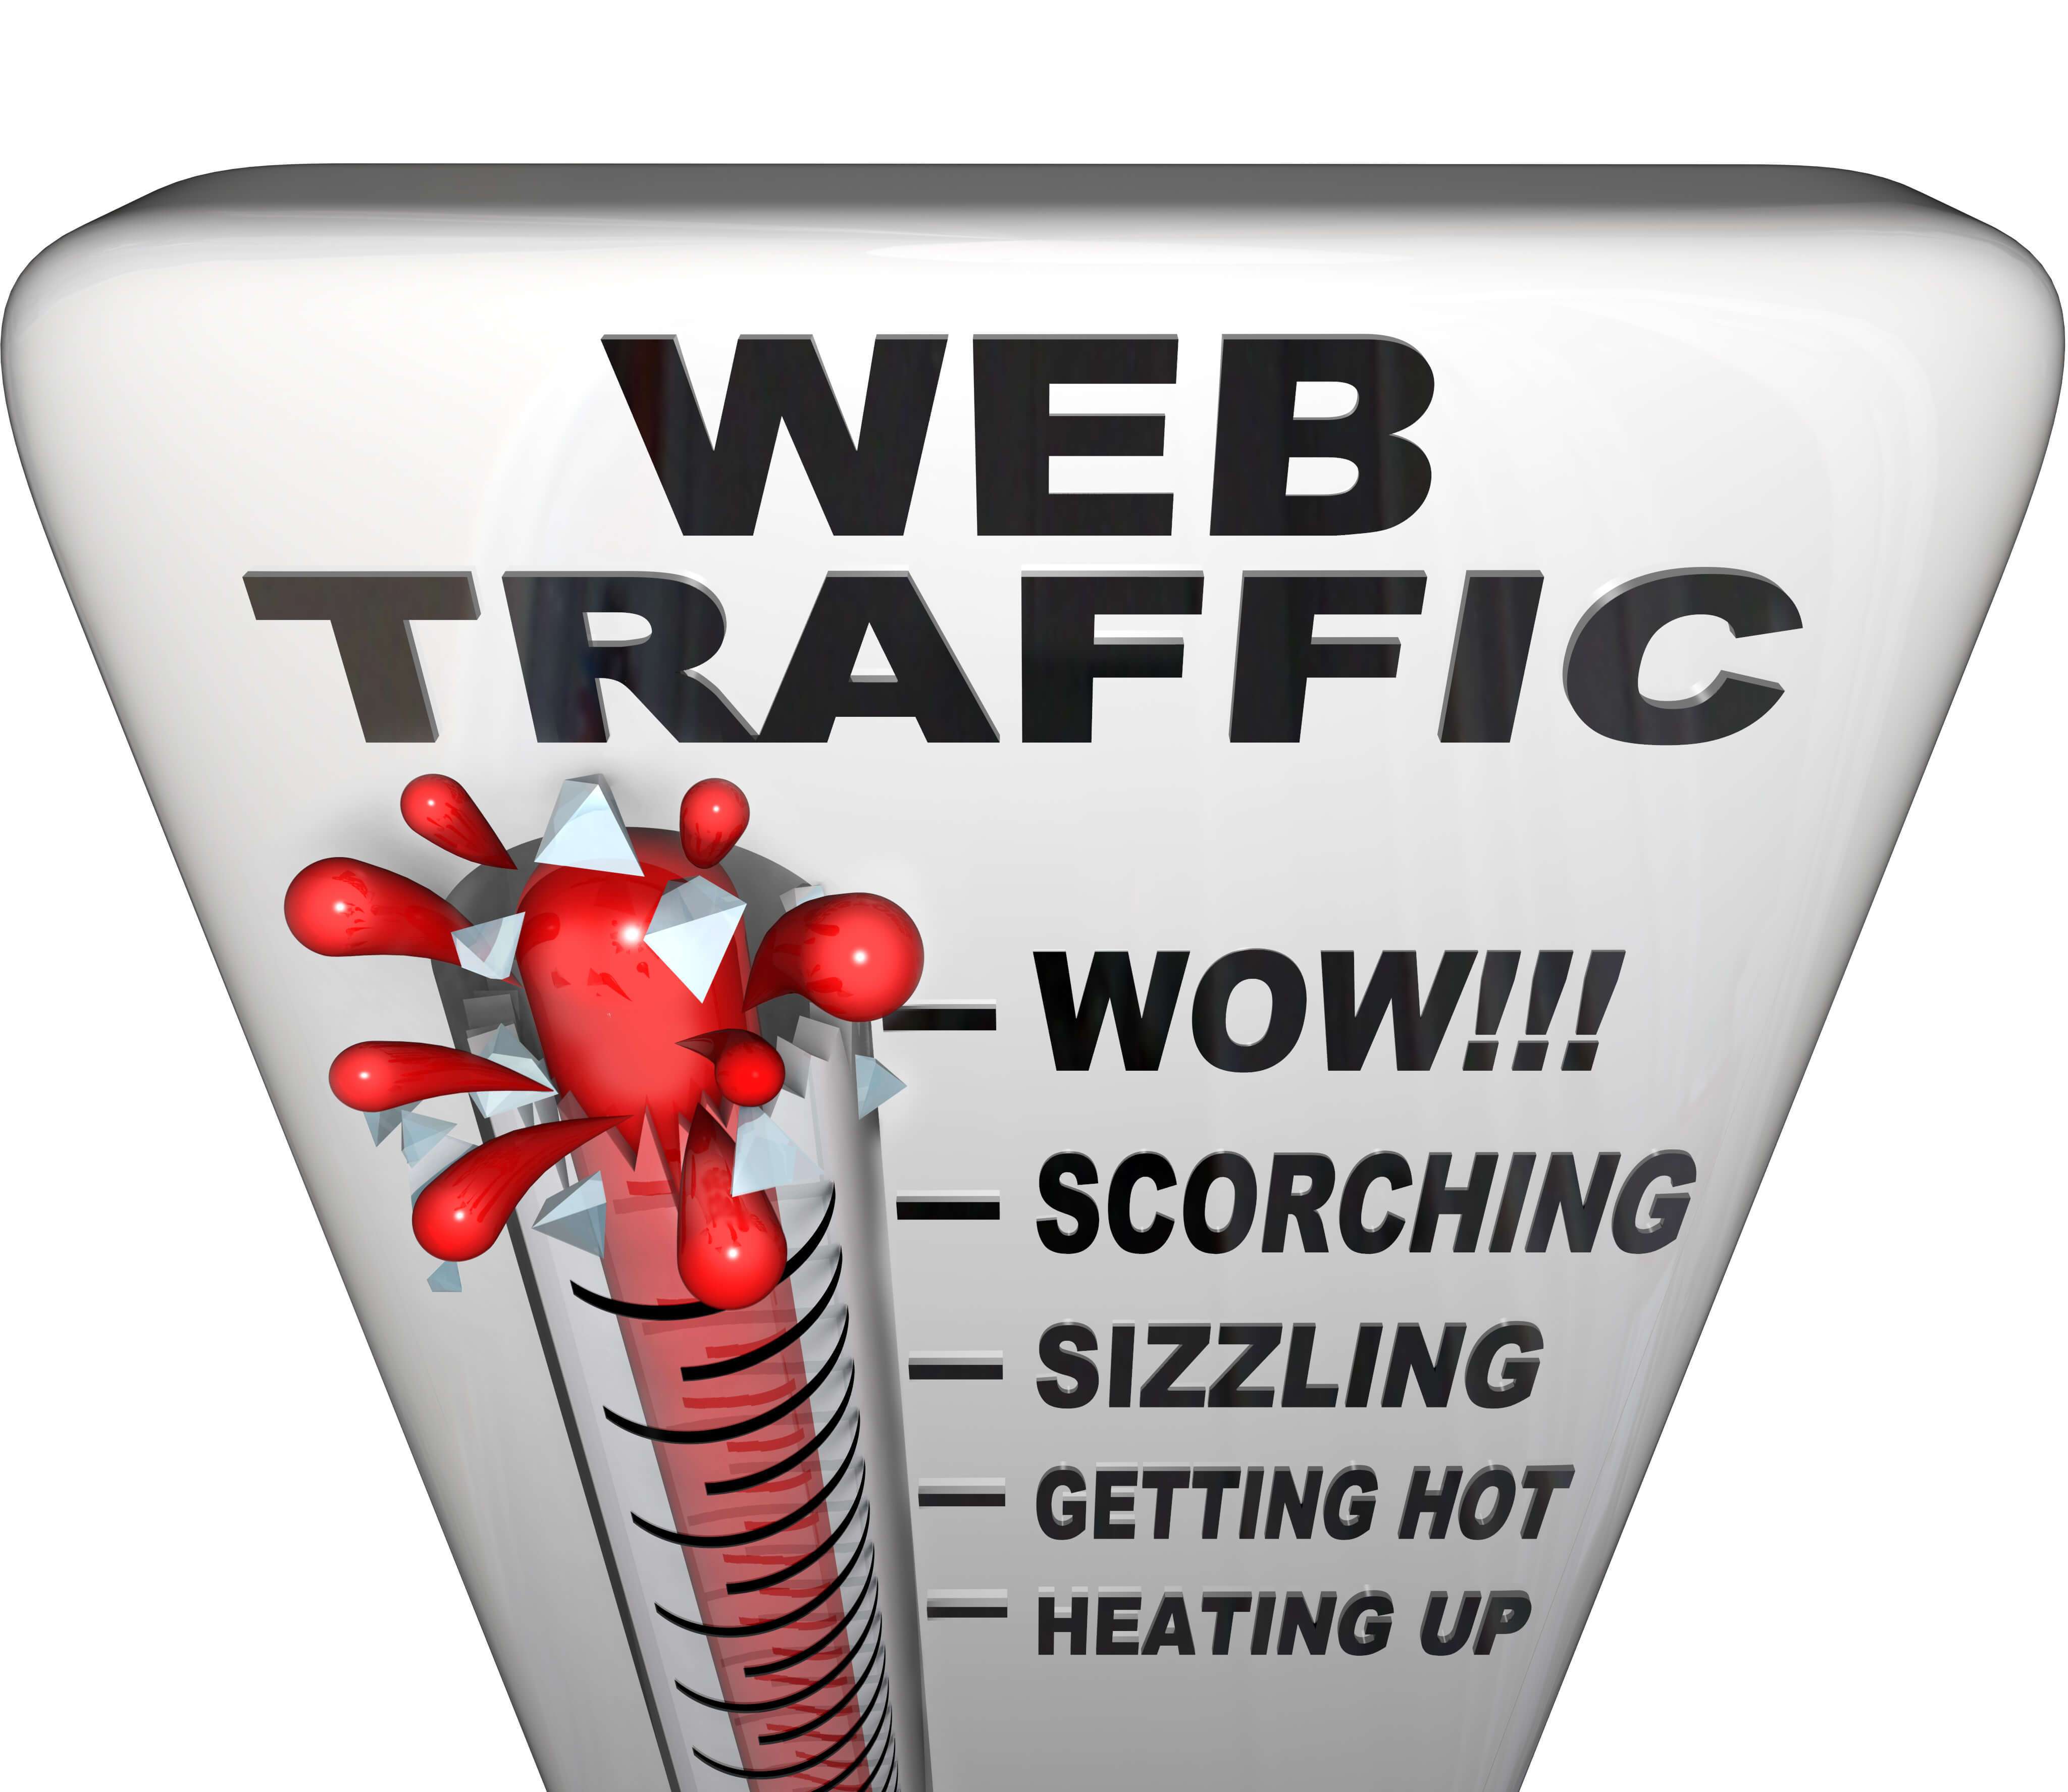 How much web traffic do you get?